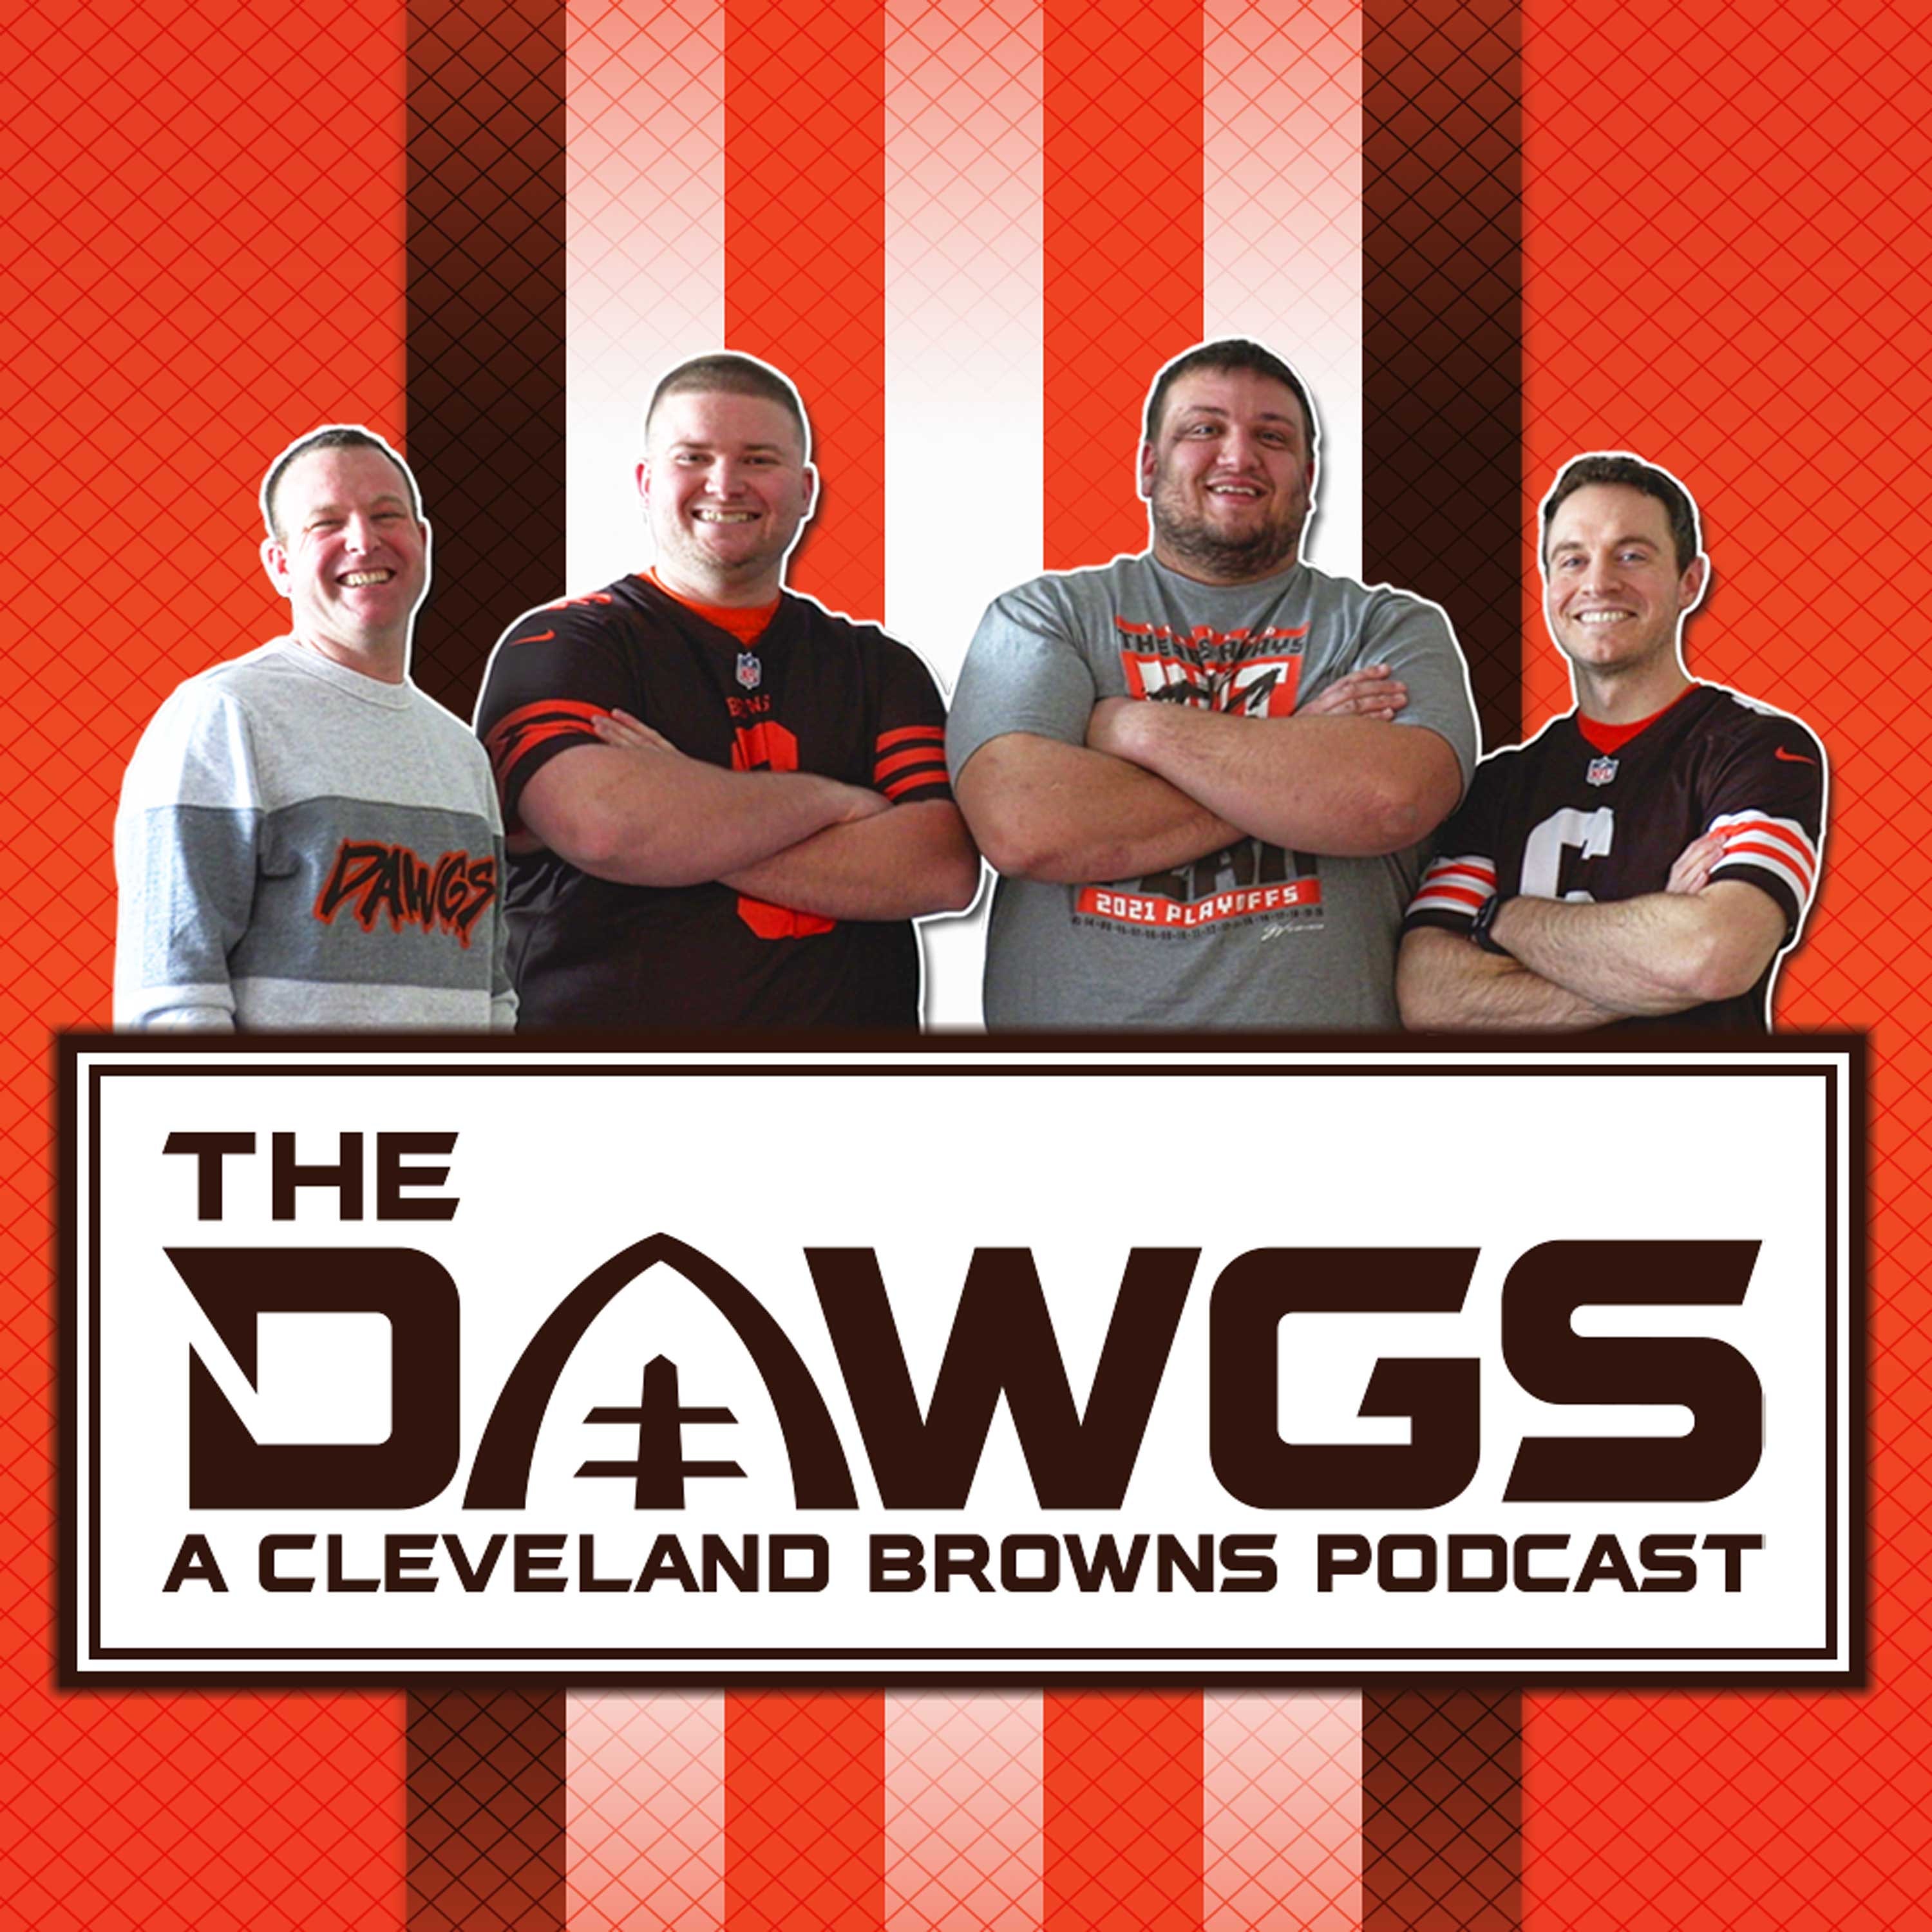 CBS Top 100 List: Nick Chubb Gets Snubbed Big Time | The Dawgs - A Cleveland Browns Podcast - June 6, 2021